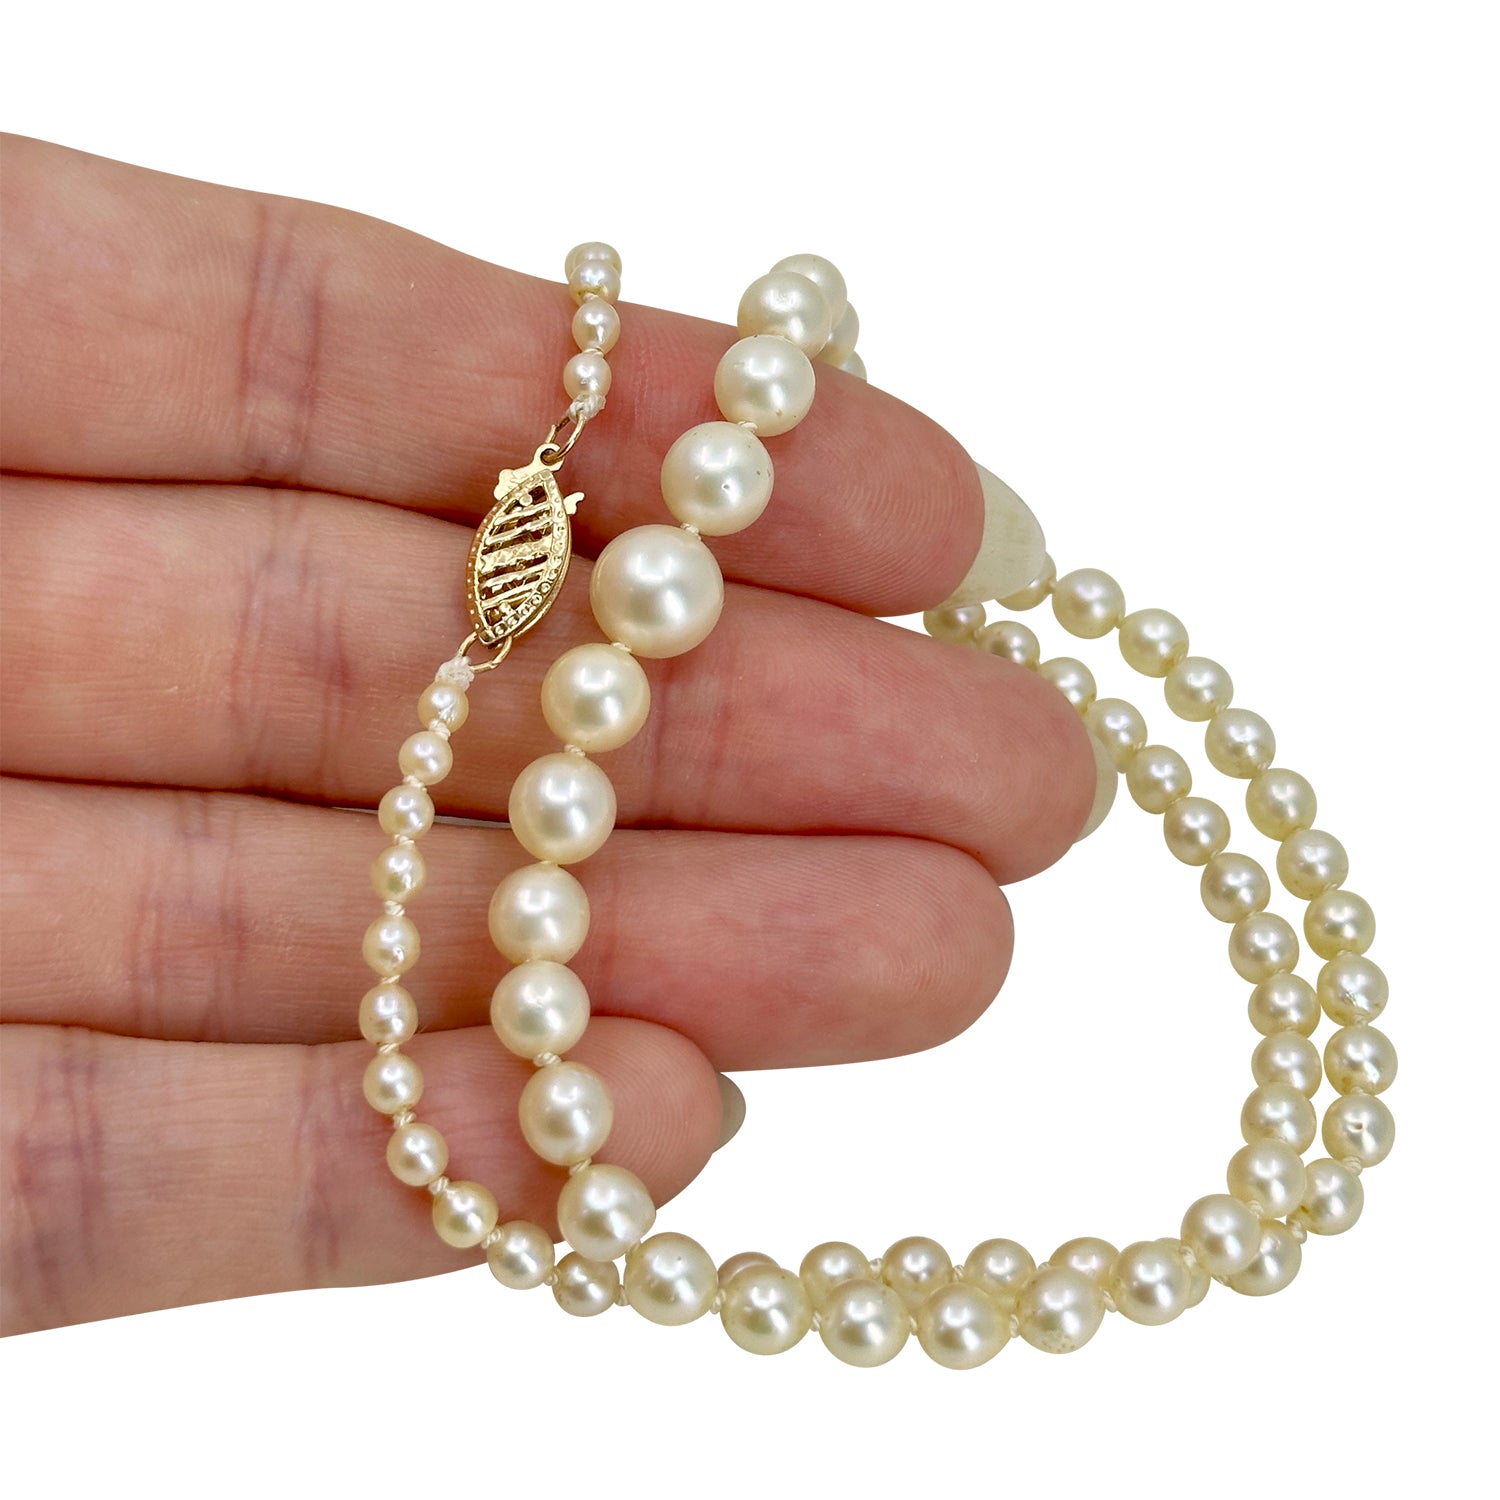 Vintage Cream Japanese Saltwater Akoya Cultured Pearl Necklace - 14K Yellow Gold 16.50 Inch